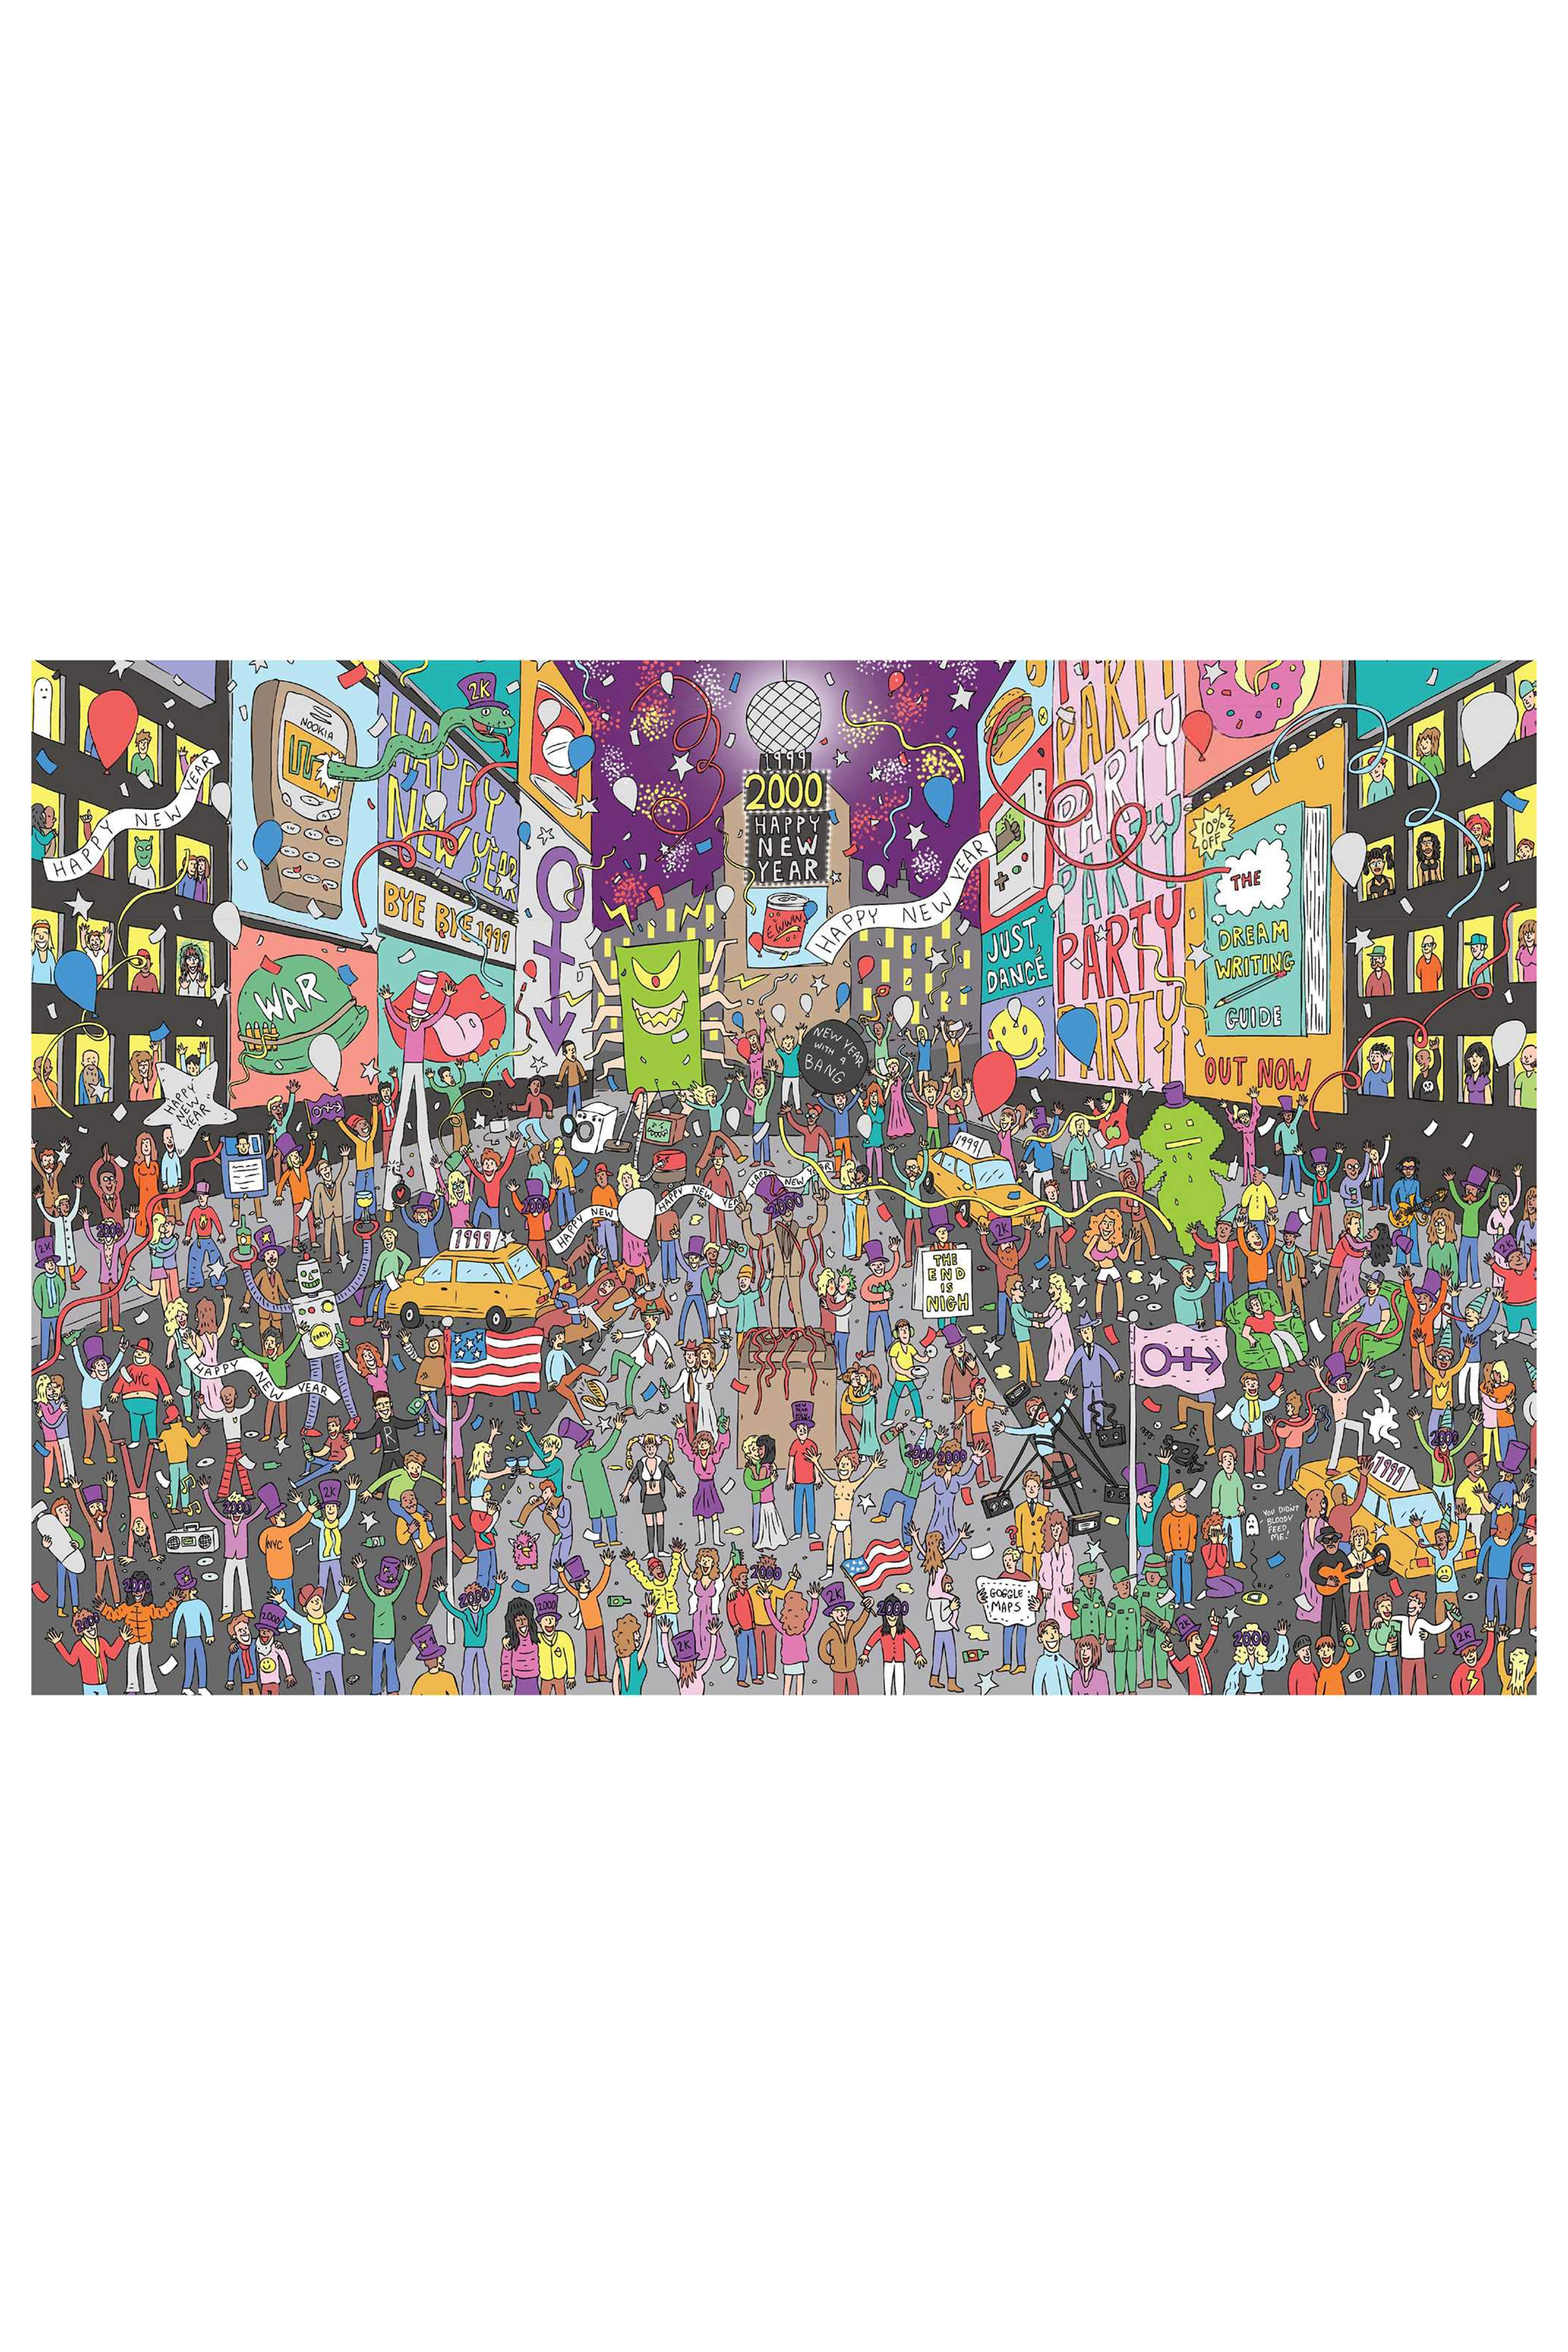 Where's Prince? In 1999 Puzzle